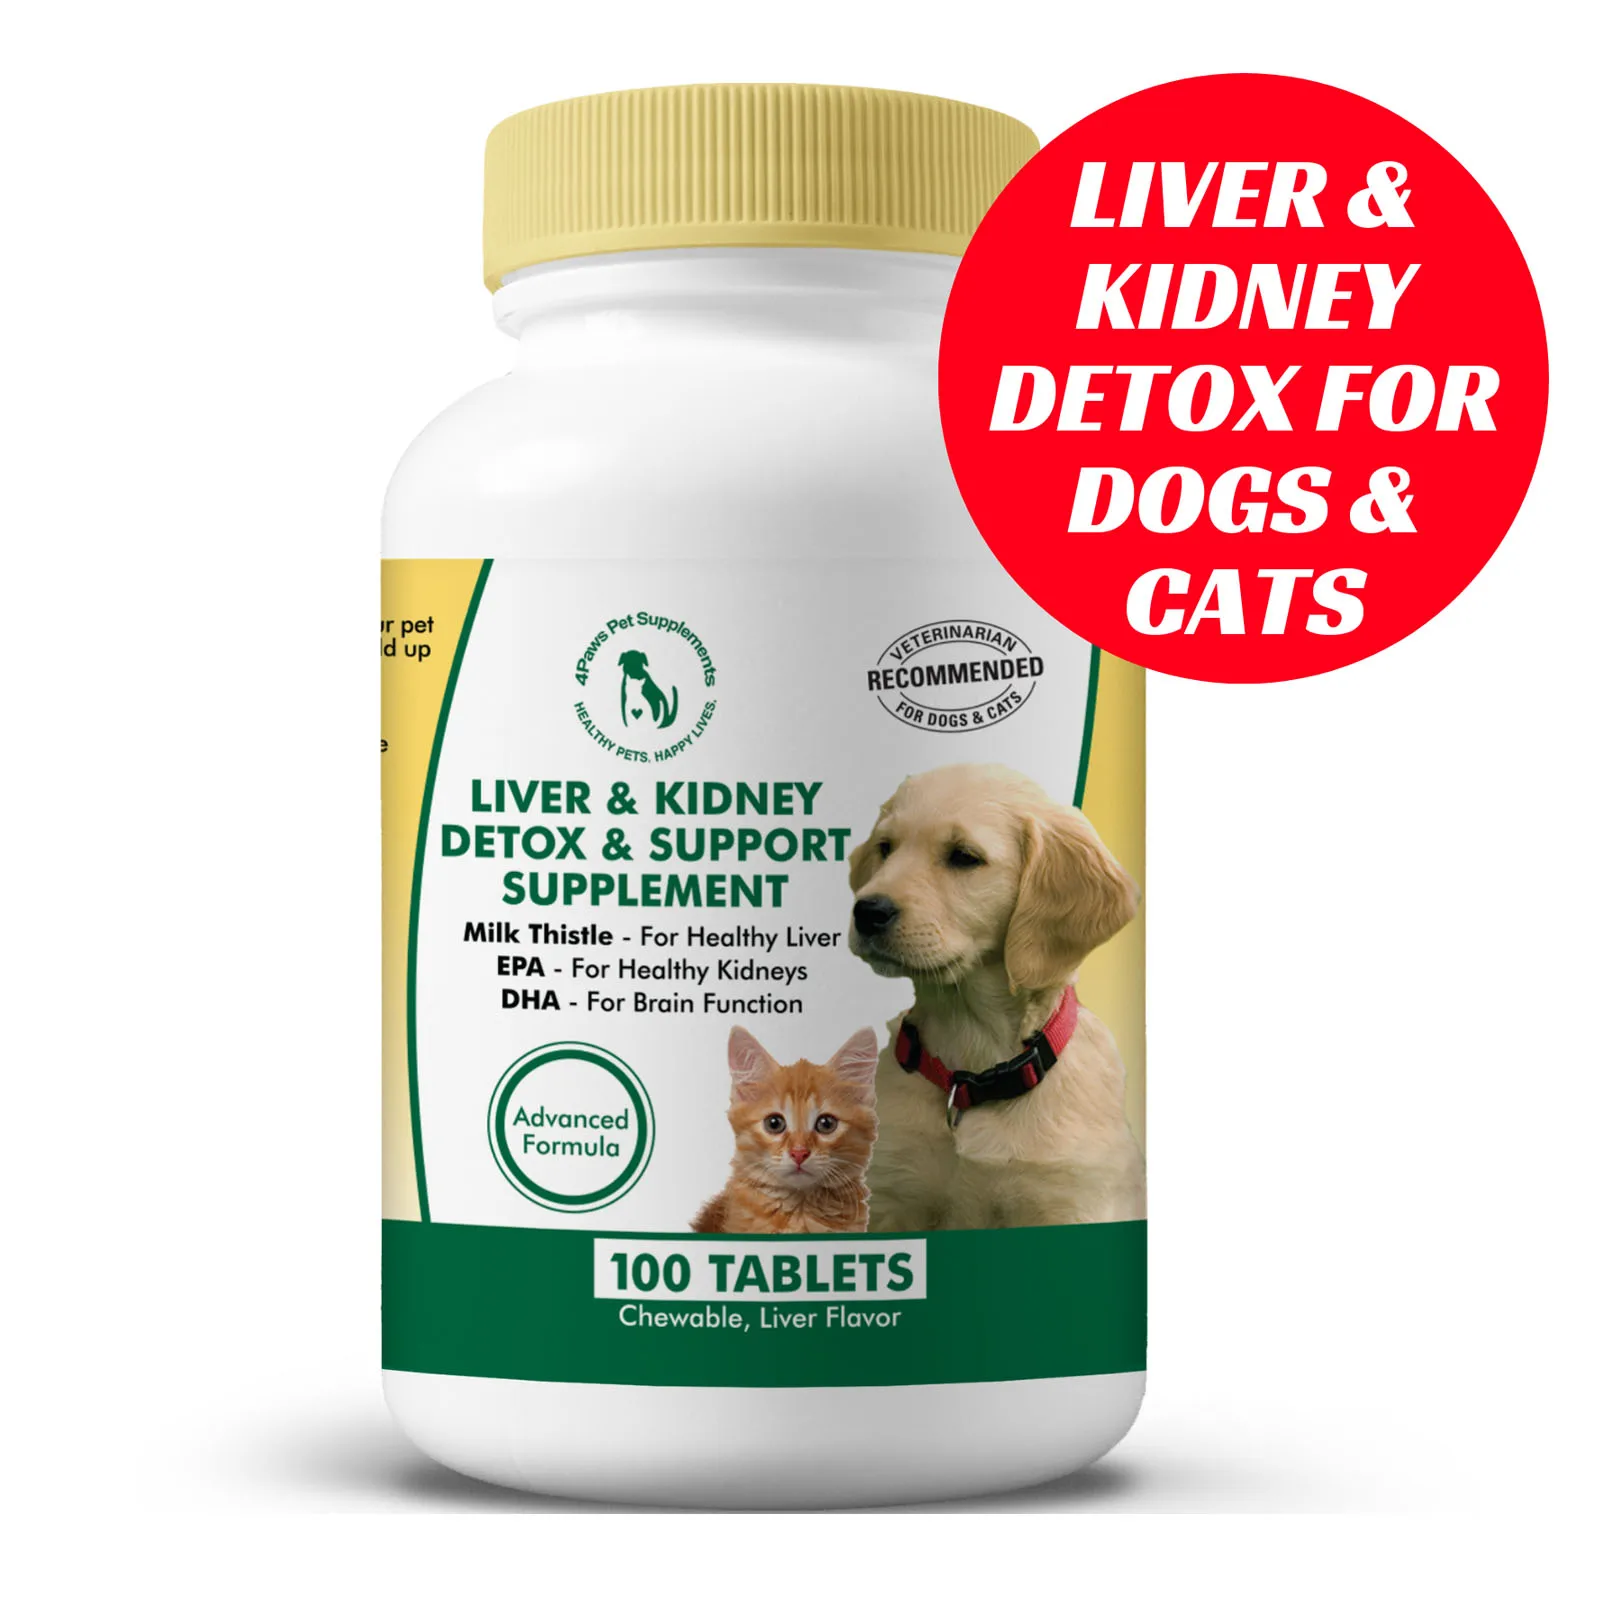 

Liver & Kidney Detox Support Supplement for Dogs & Cats. 100 Tabs